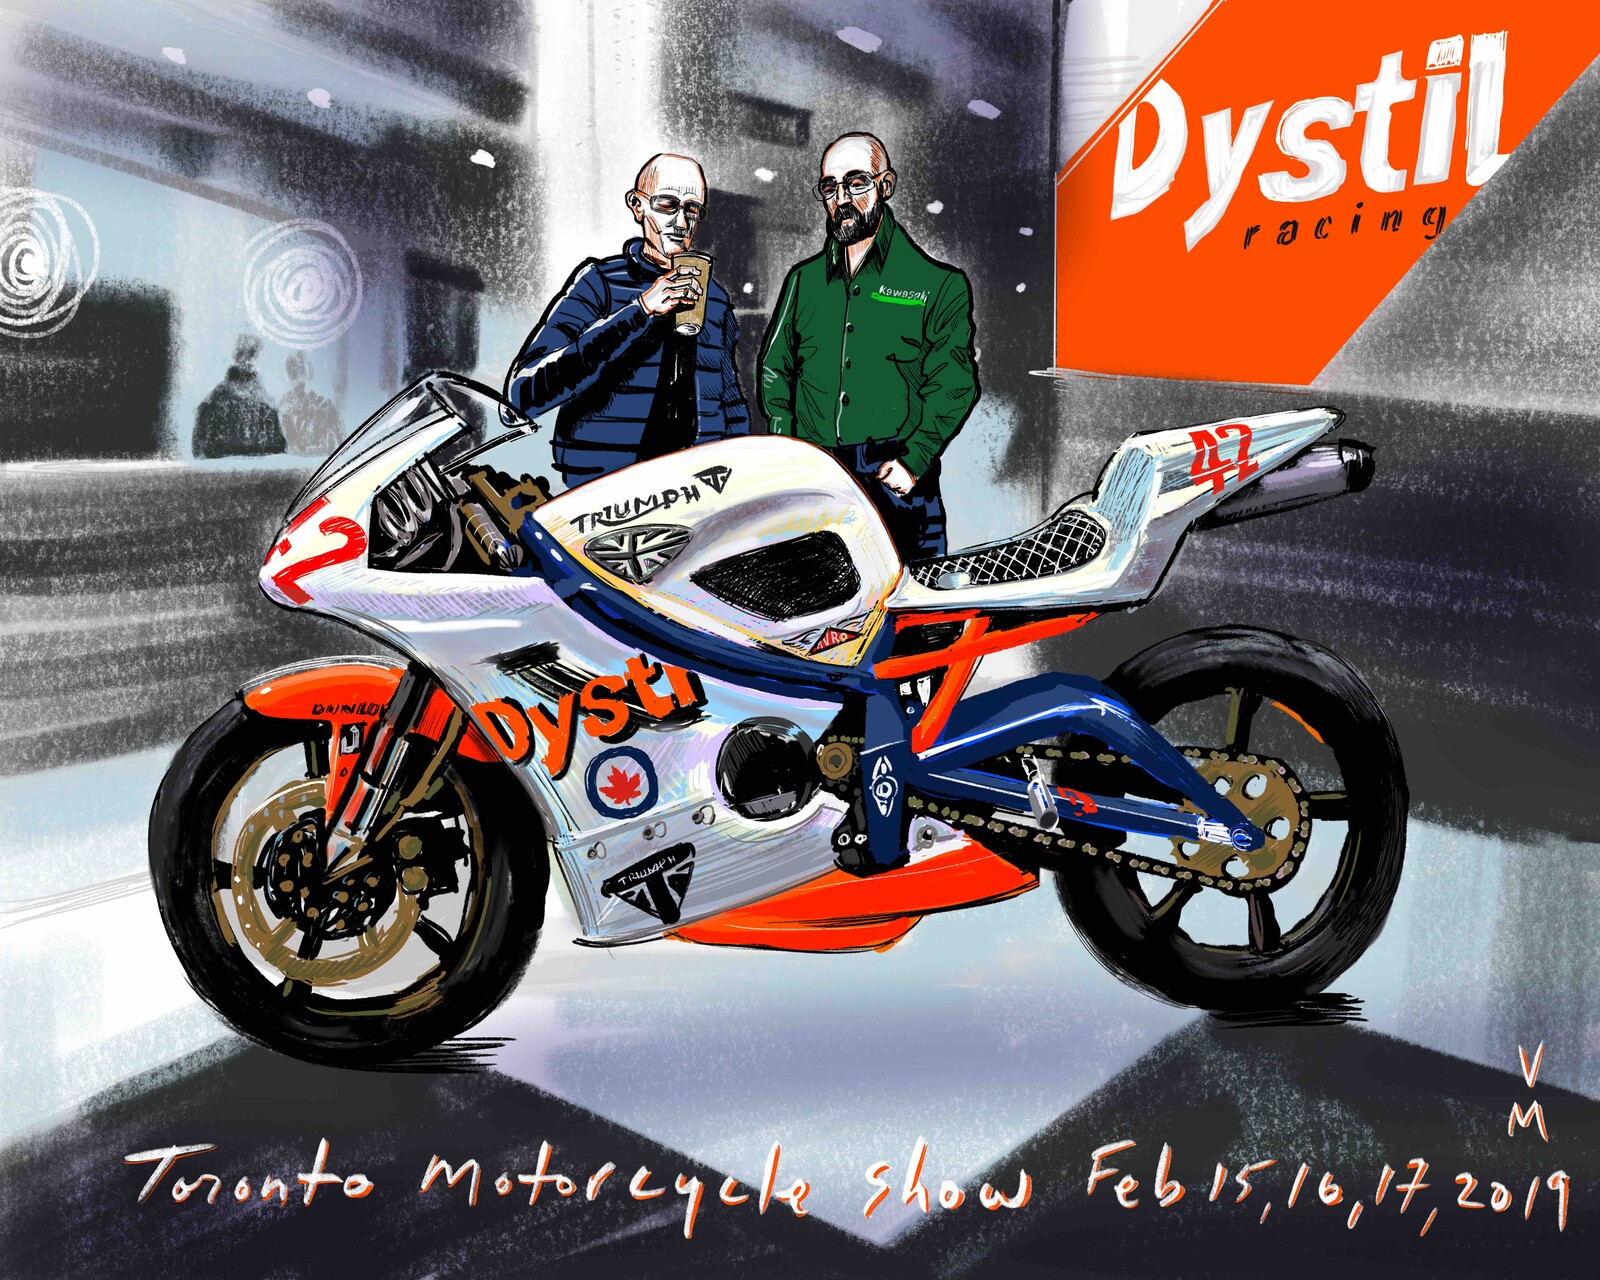 Dystil Racing at the Toronto Motorcycle Show